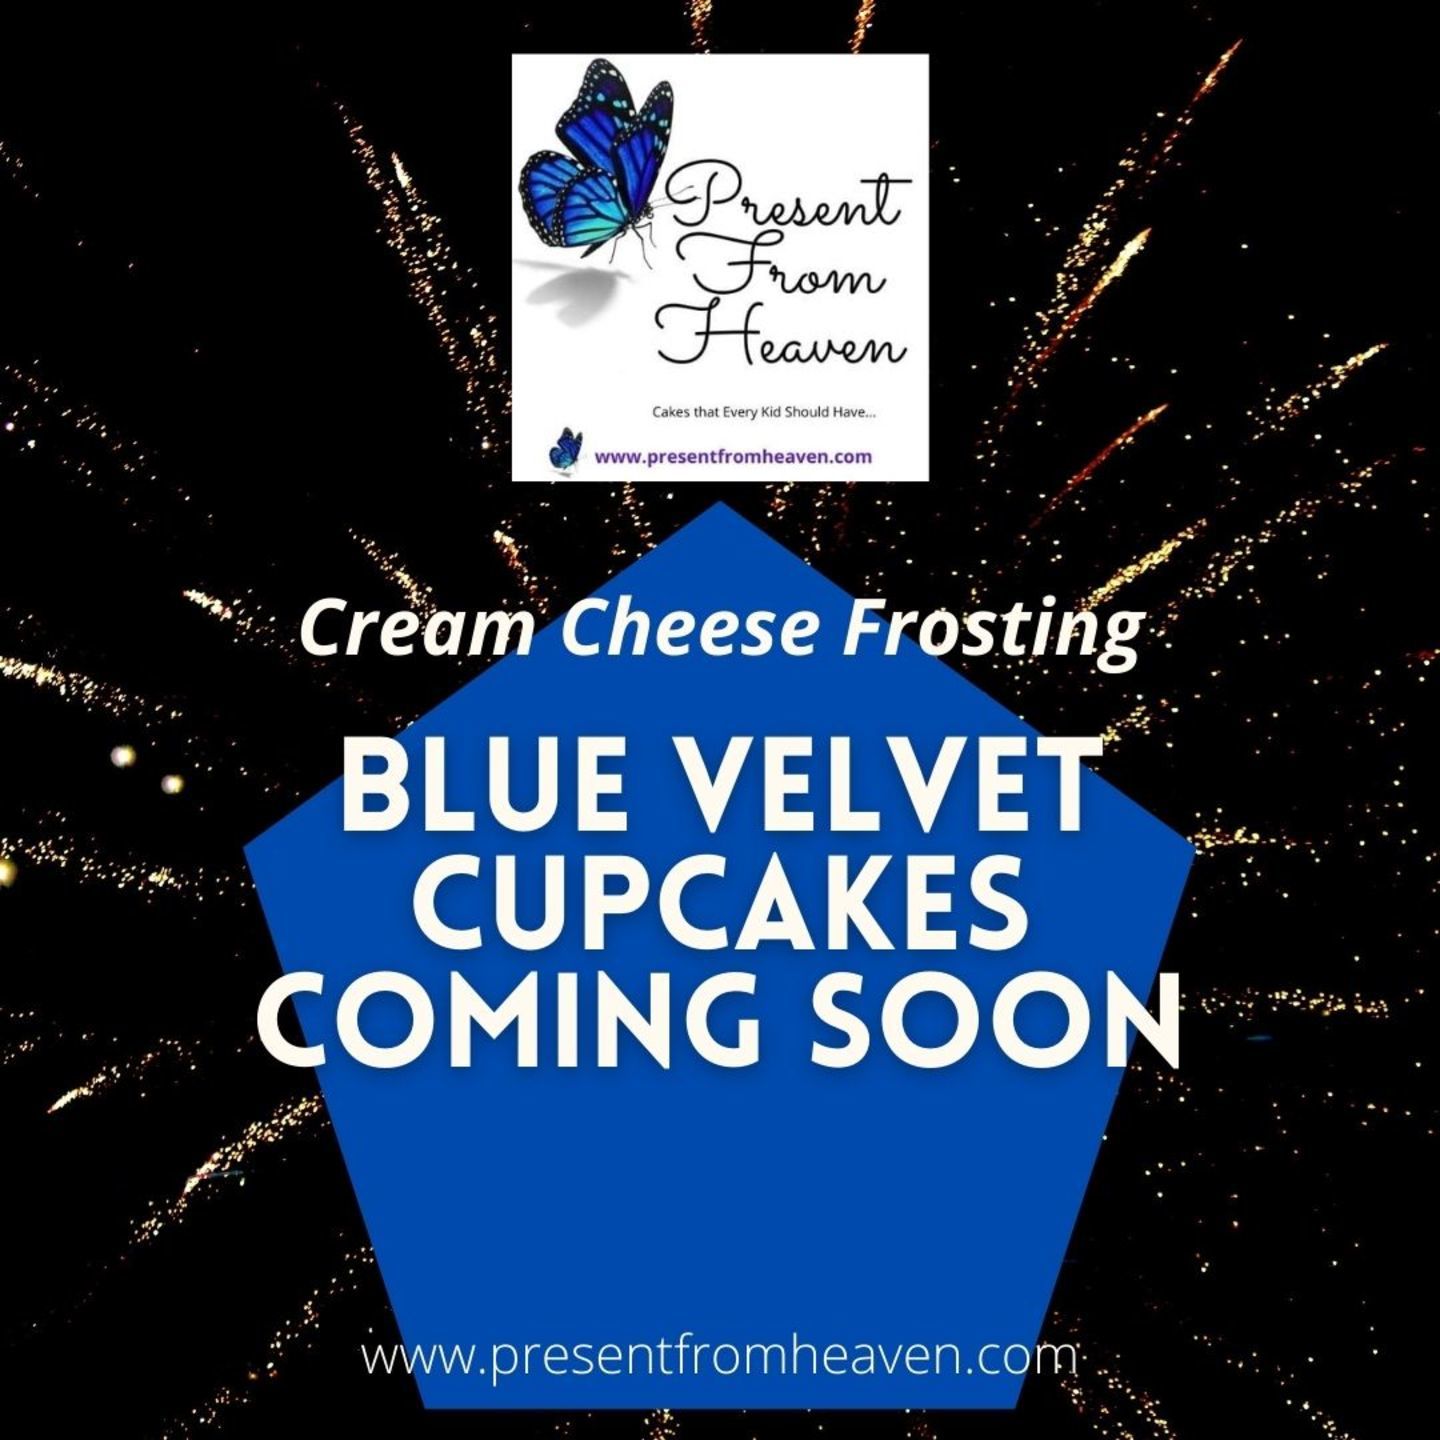 Blue Velvet Cupcakes with Cream Cheese Frosting- Coming soon